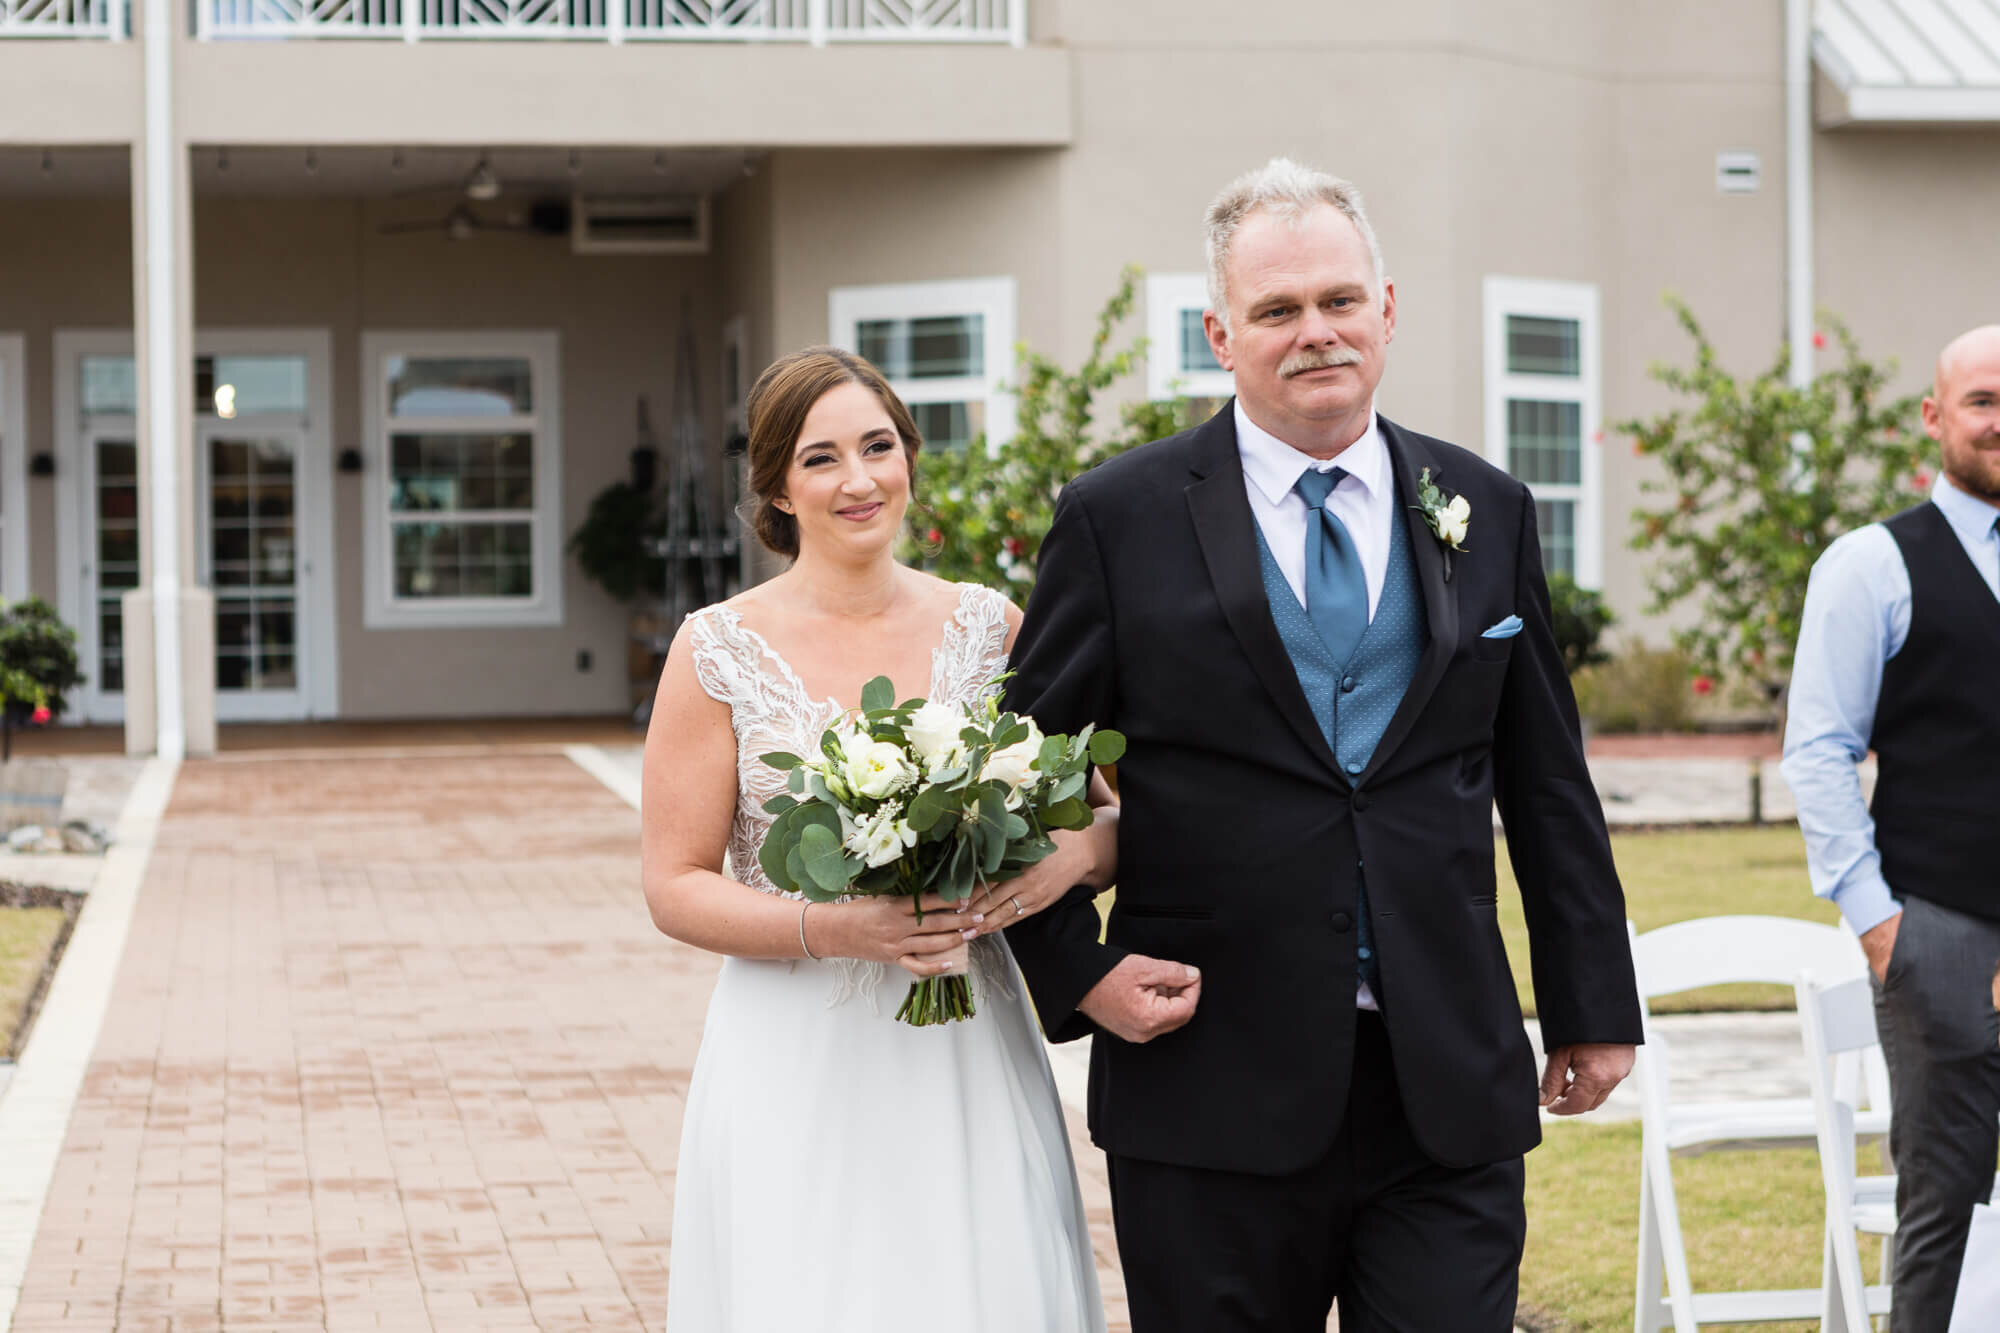  outdoor wedding at Kissimmee's Island Grove Wine Company at Formosa Gardens 